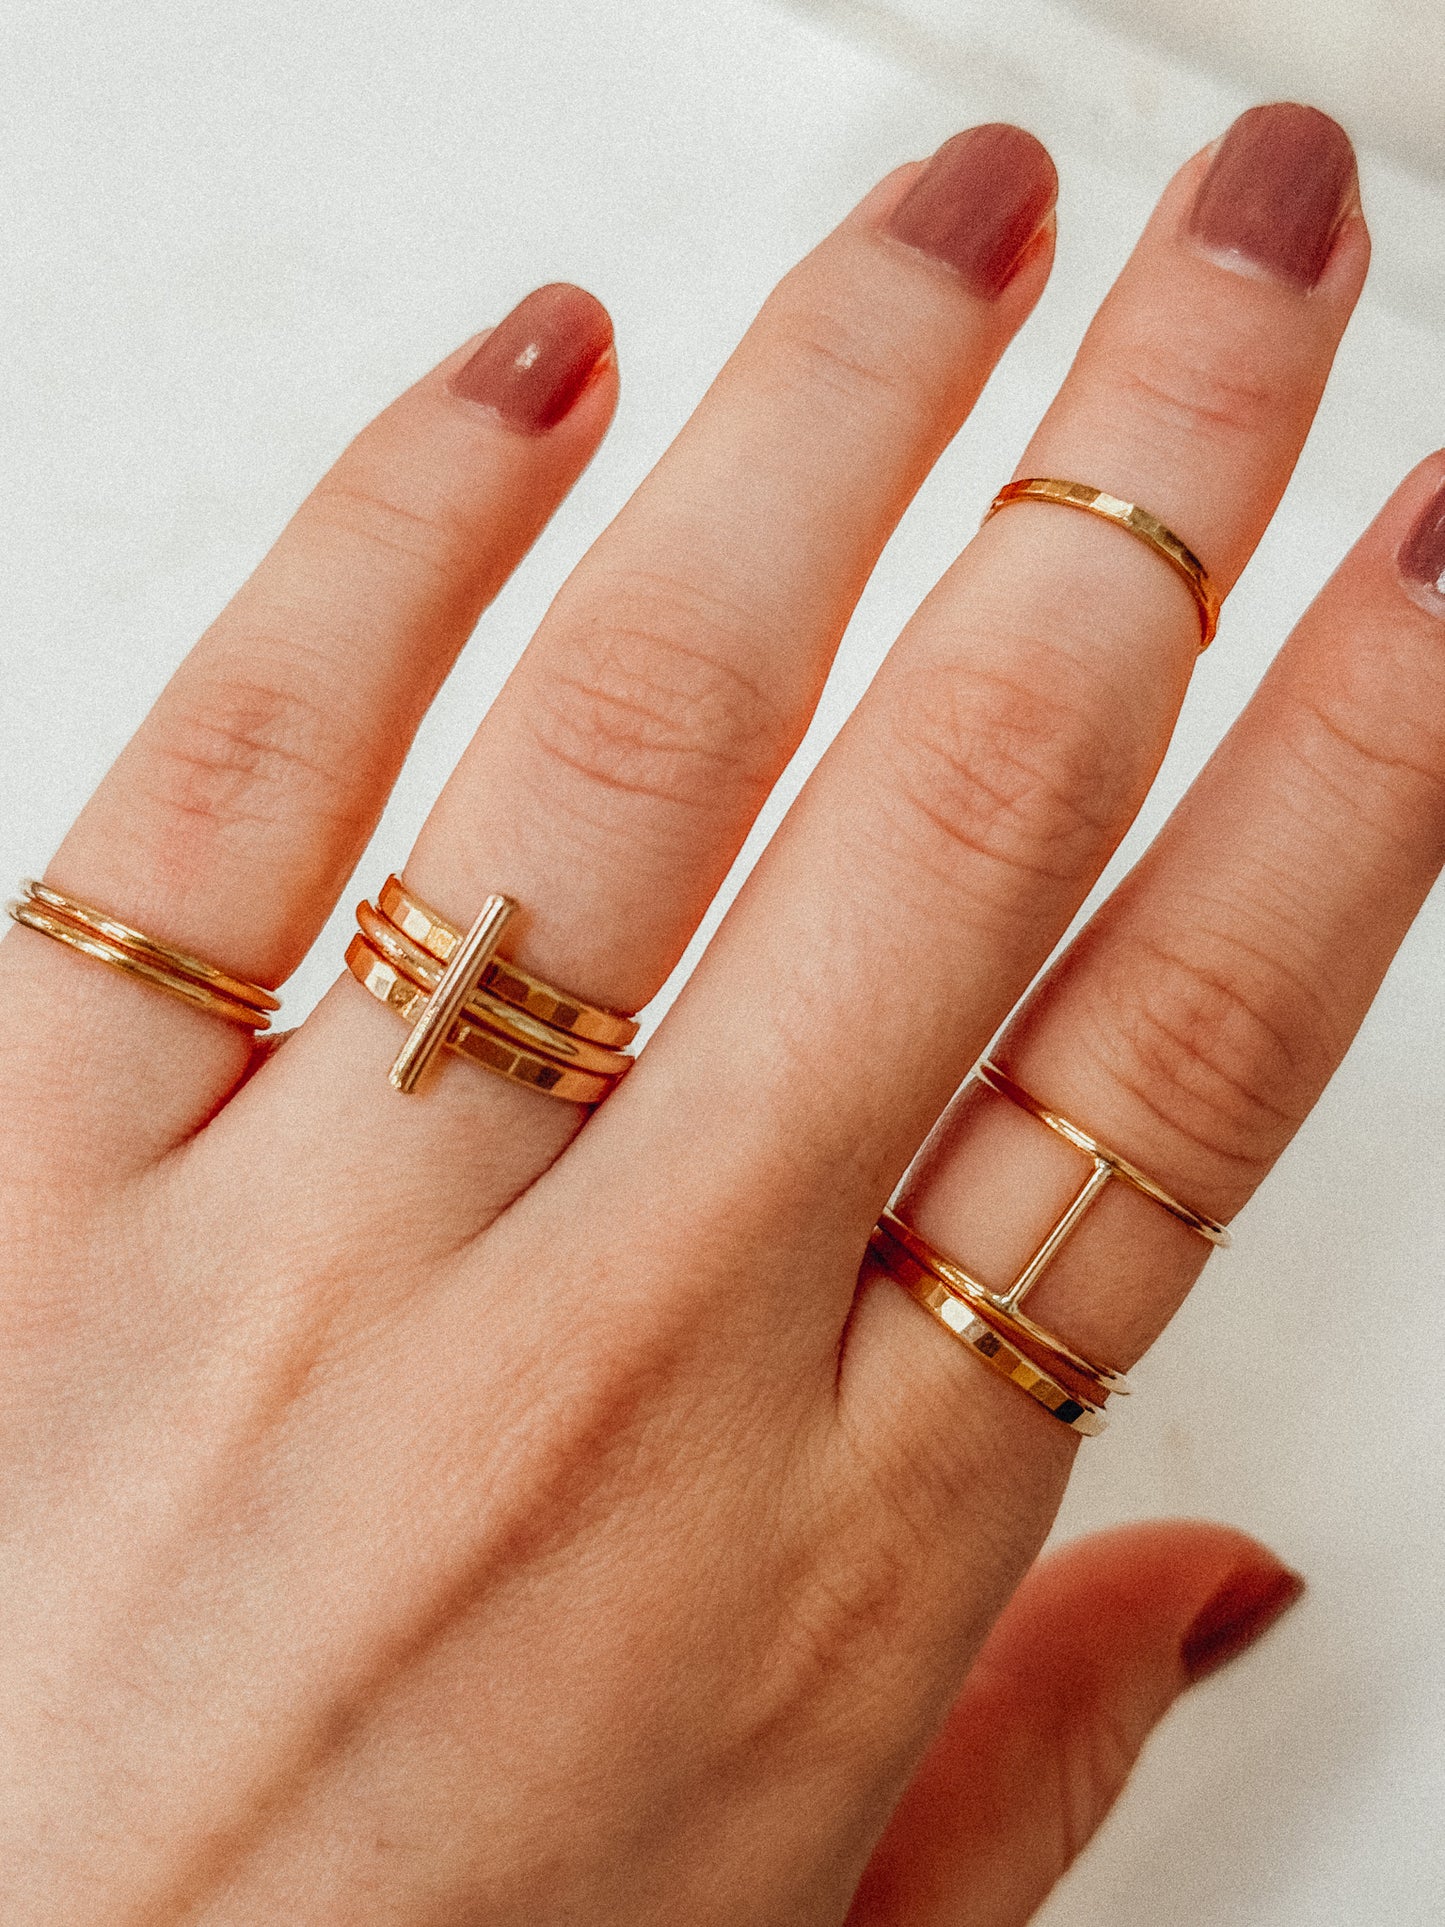 Mini Bar Set of 3 Stacking Rings, Gold Fill, Rose Gold Fill or Sterling Silver